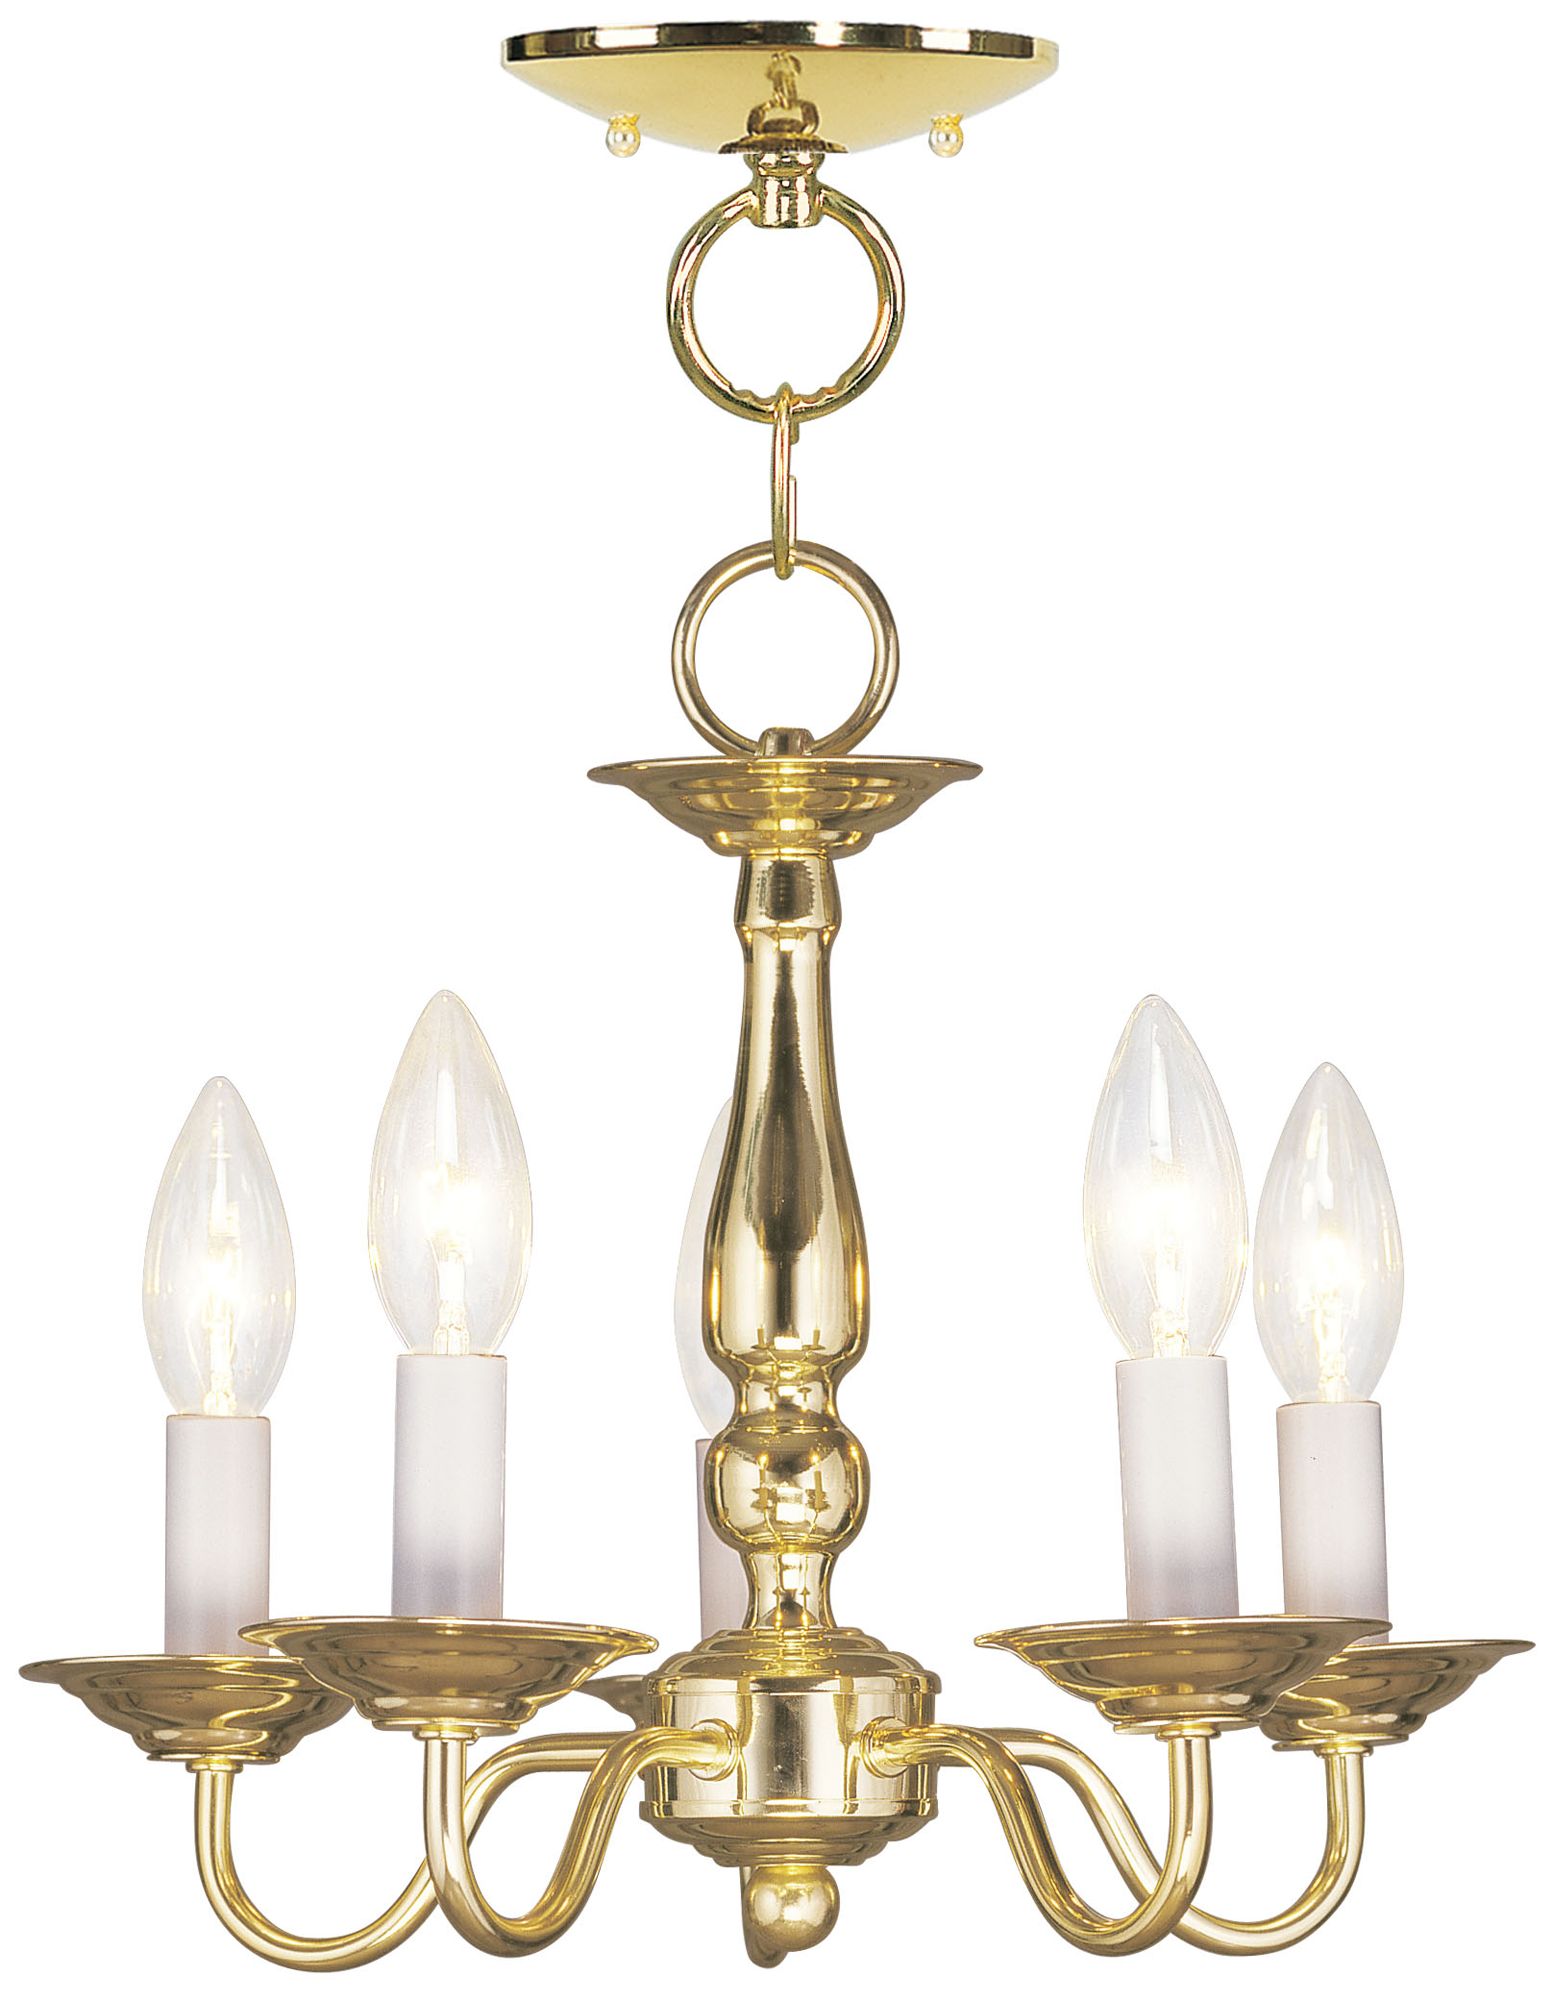 5 Light Polished Brass Convertible Mini Chandelier Ceiling Mount